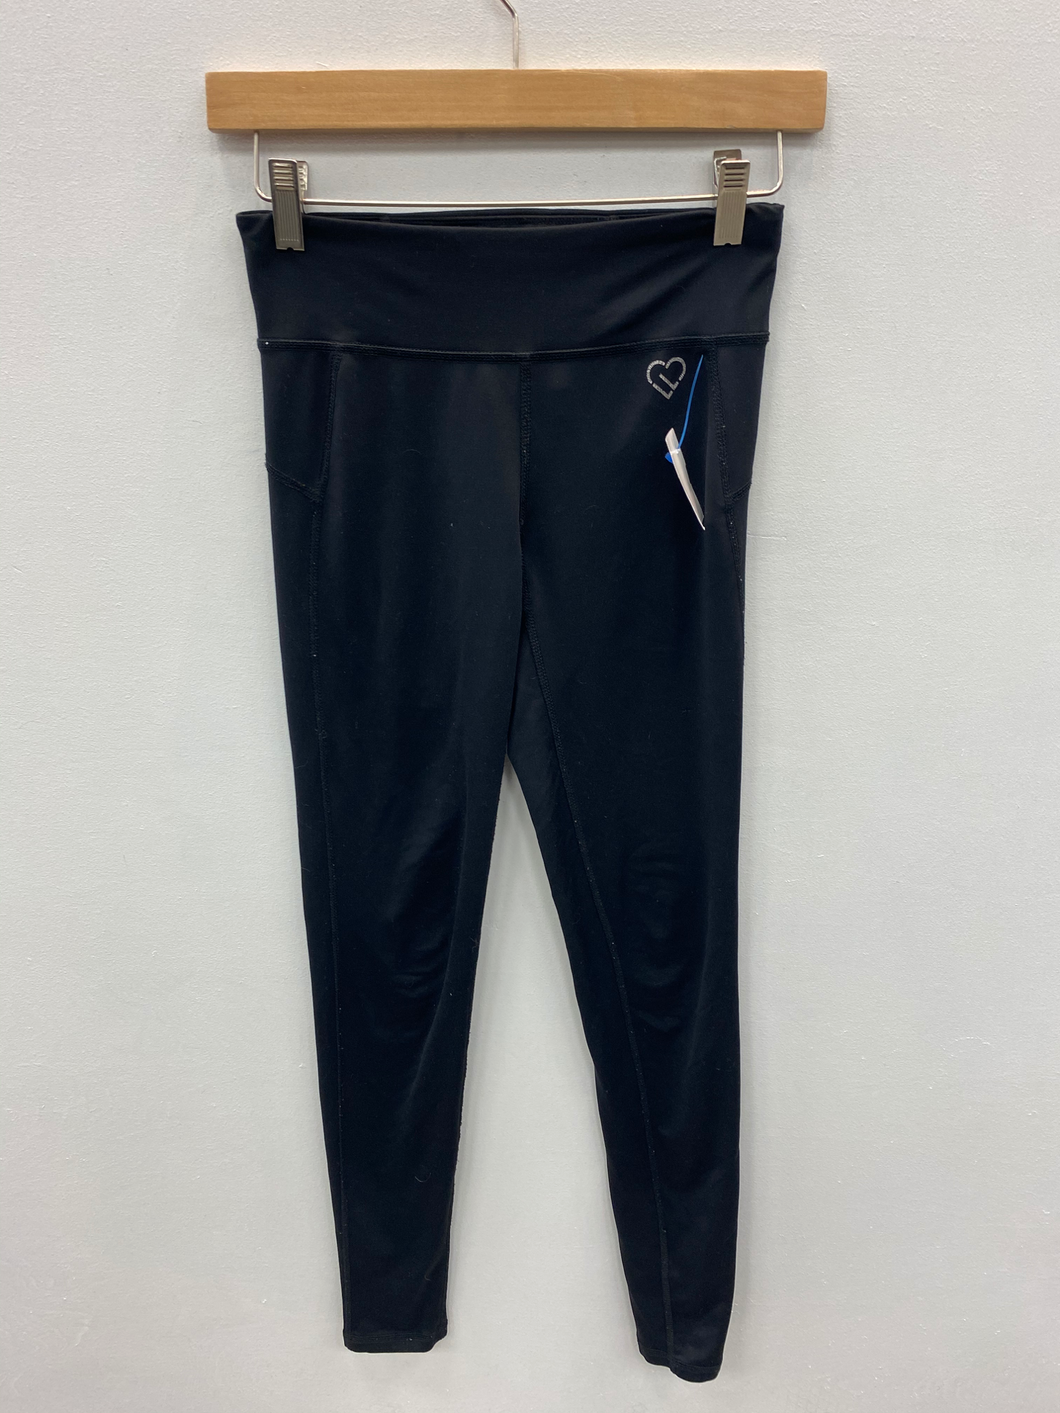 Athletic Pants Size Small